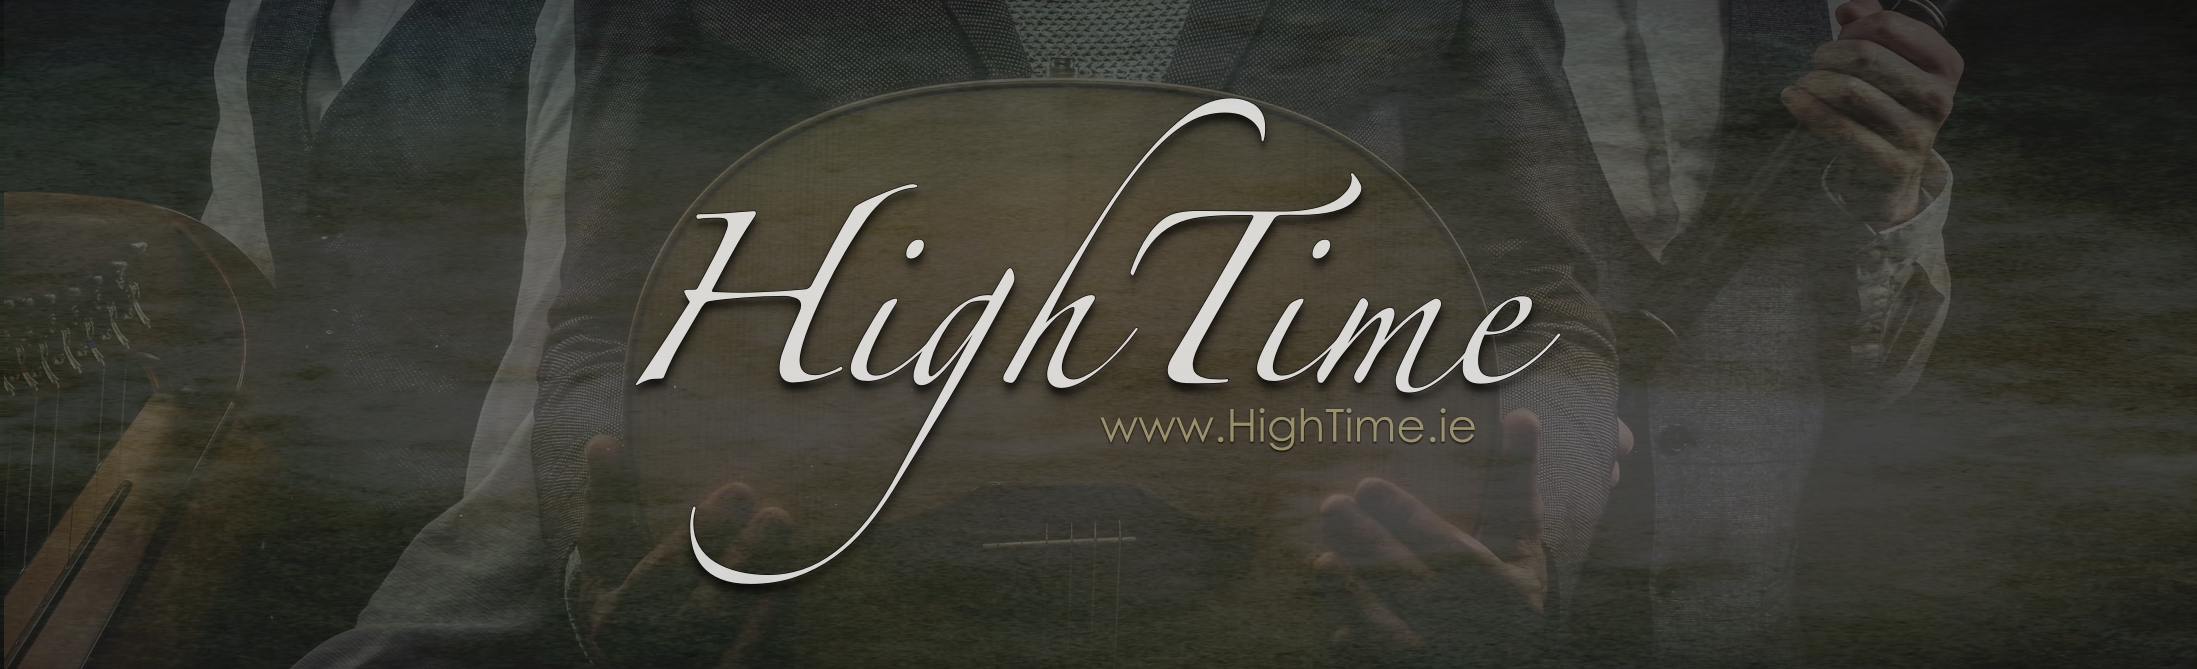 HighTime Banner Style Image